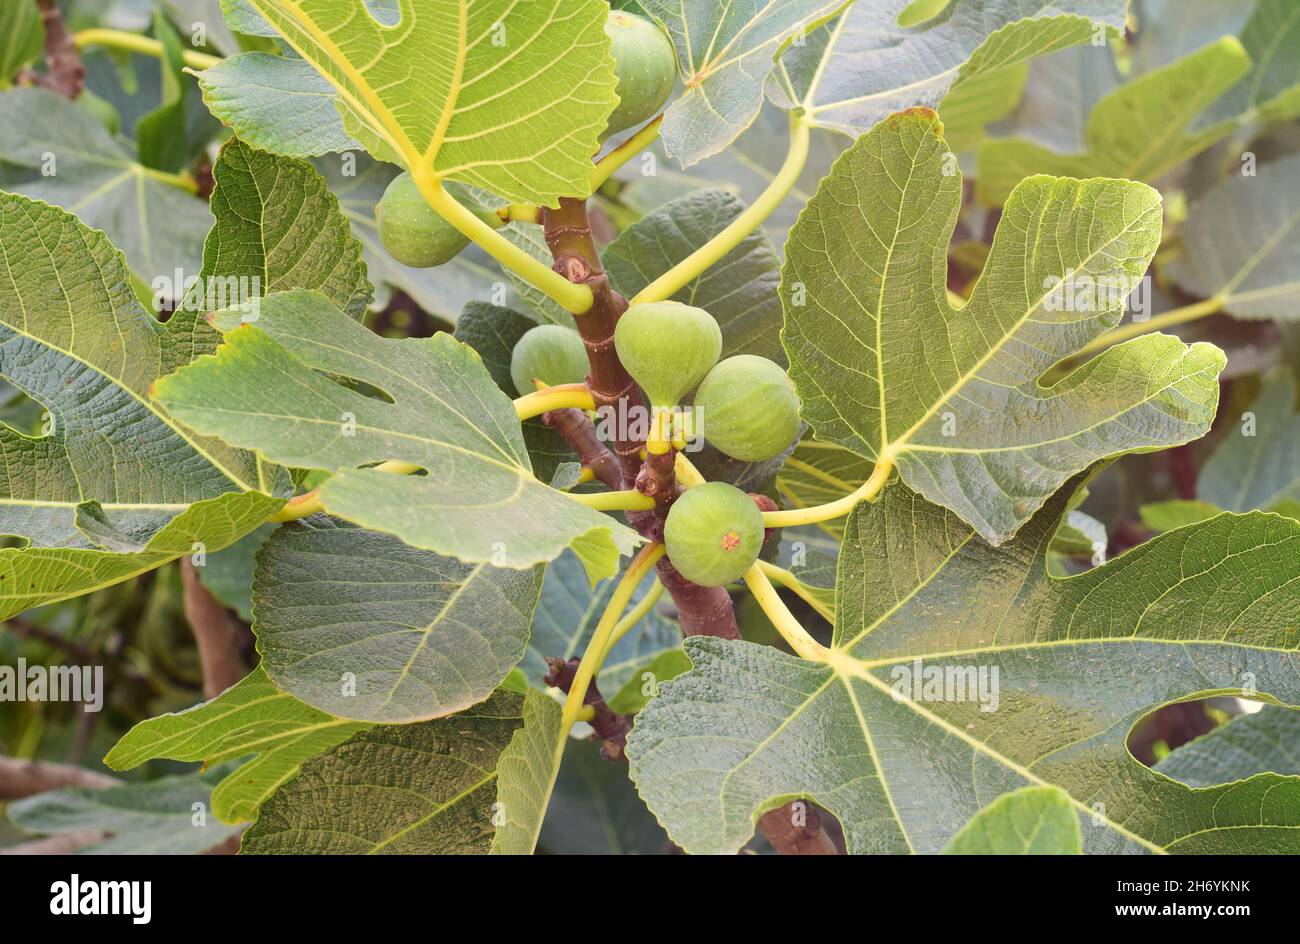 Closeup shot of unripe green figs growing on the tree Stock Photo